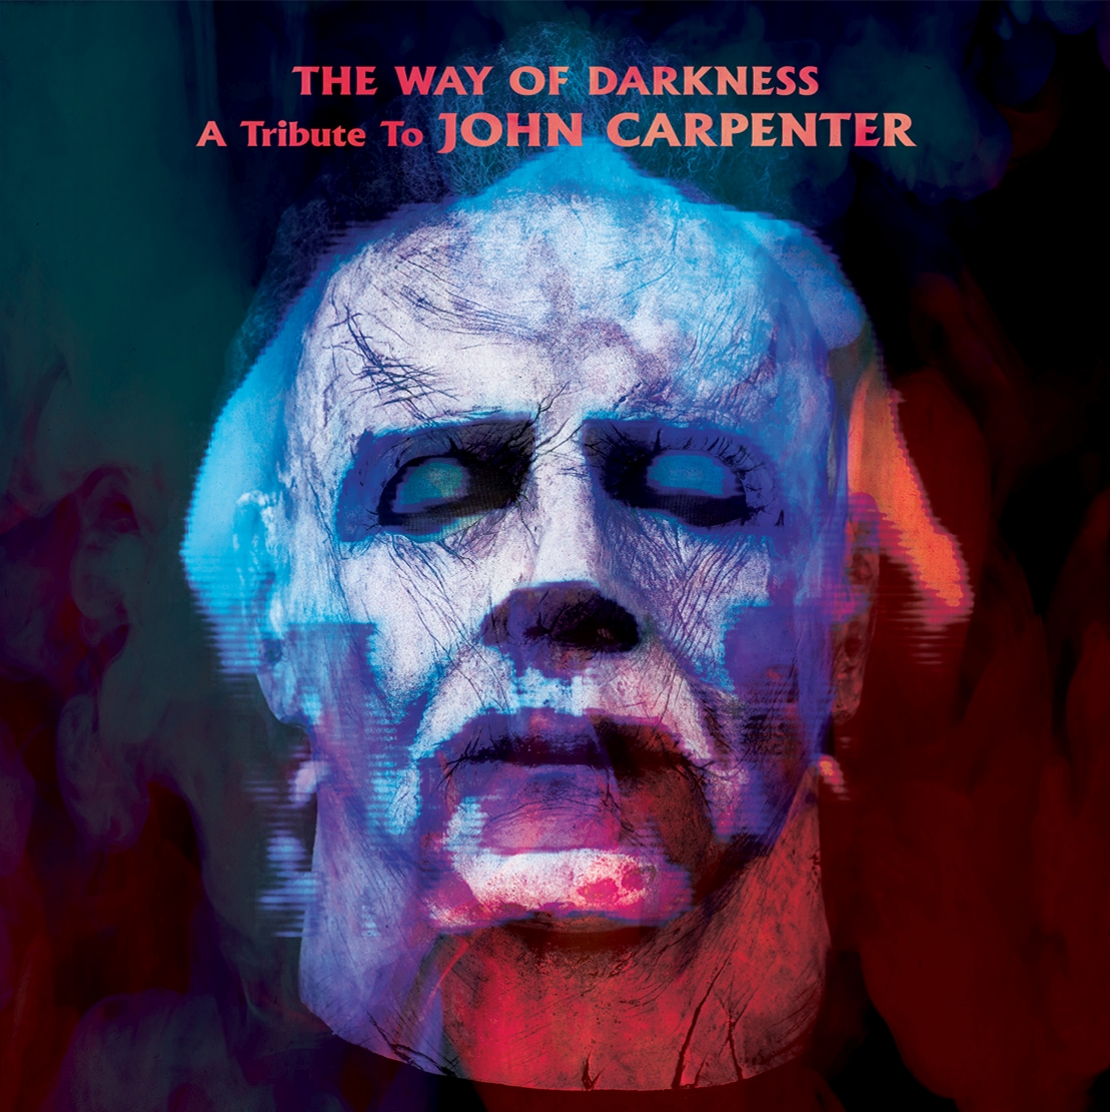 

The Way of Darkness: A Tribute to John Carpenter [LP] - VINYL